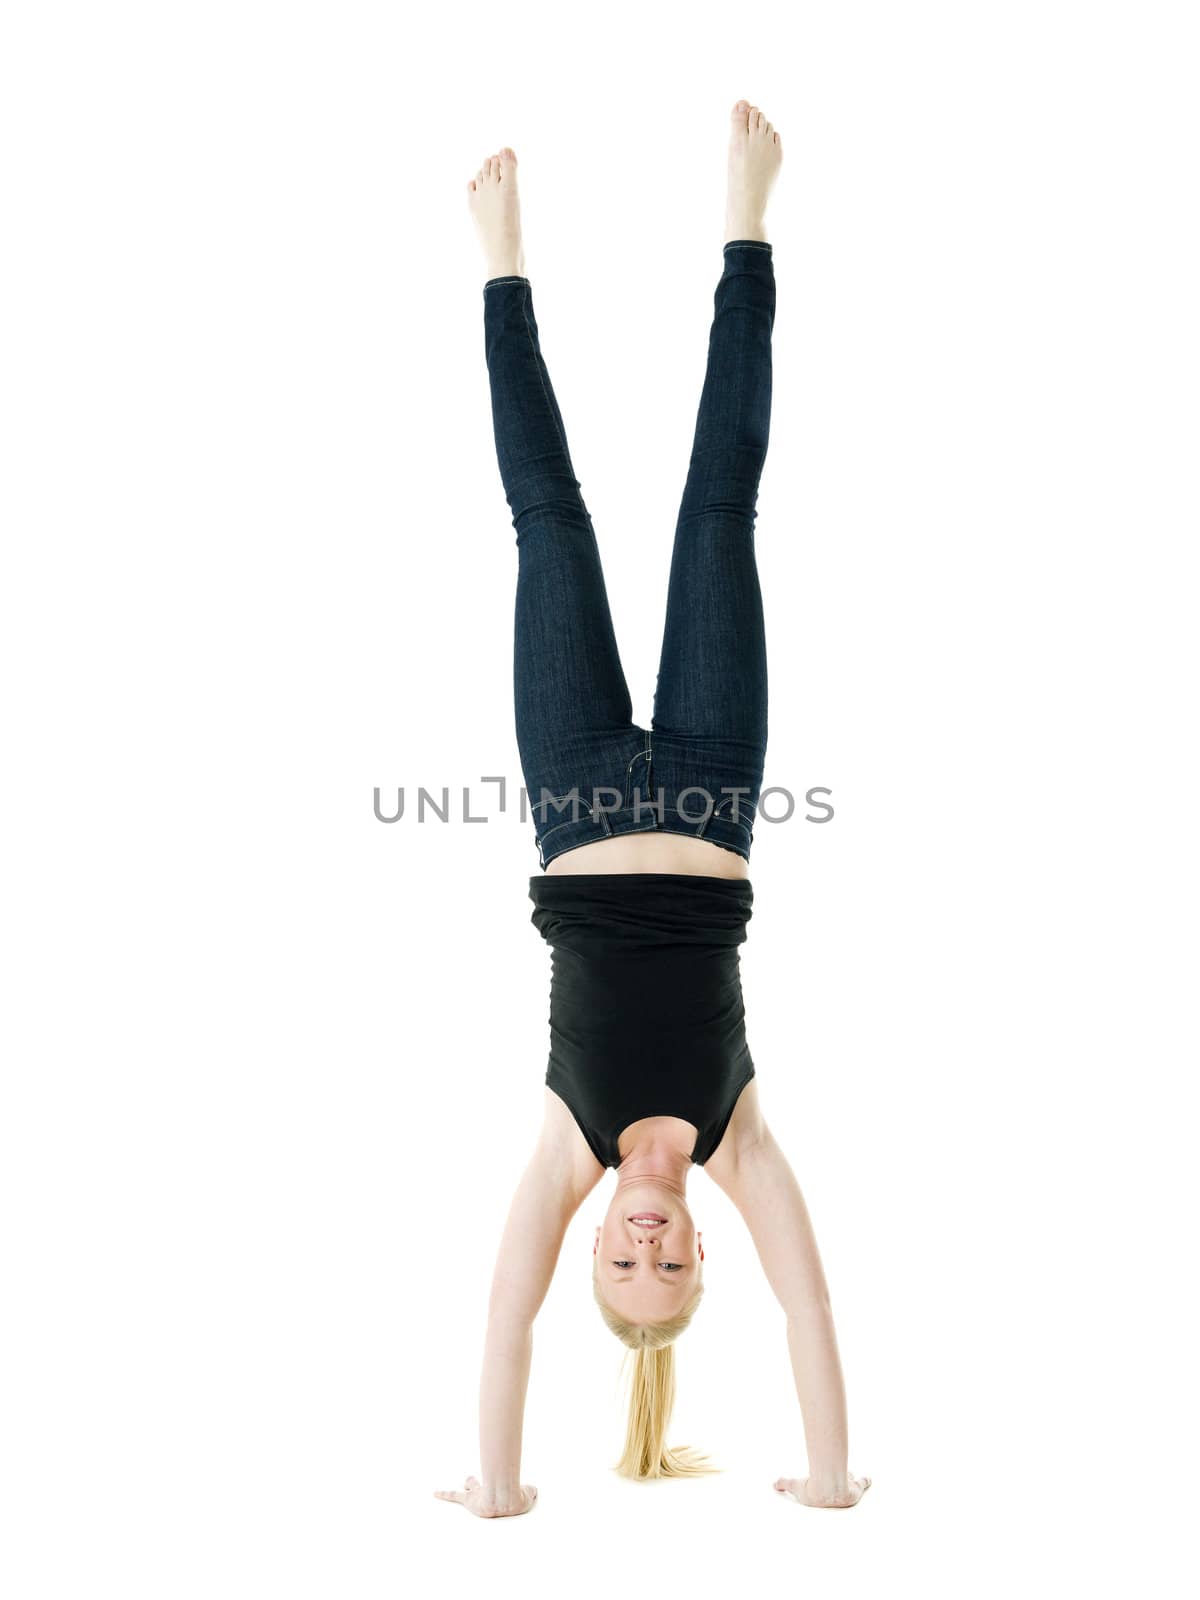 Blond Handstanding woman isolated on white background